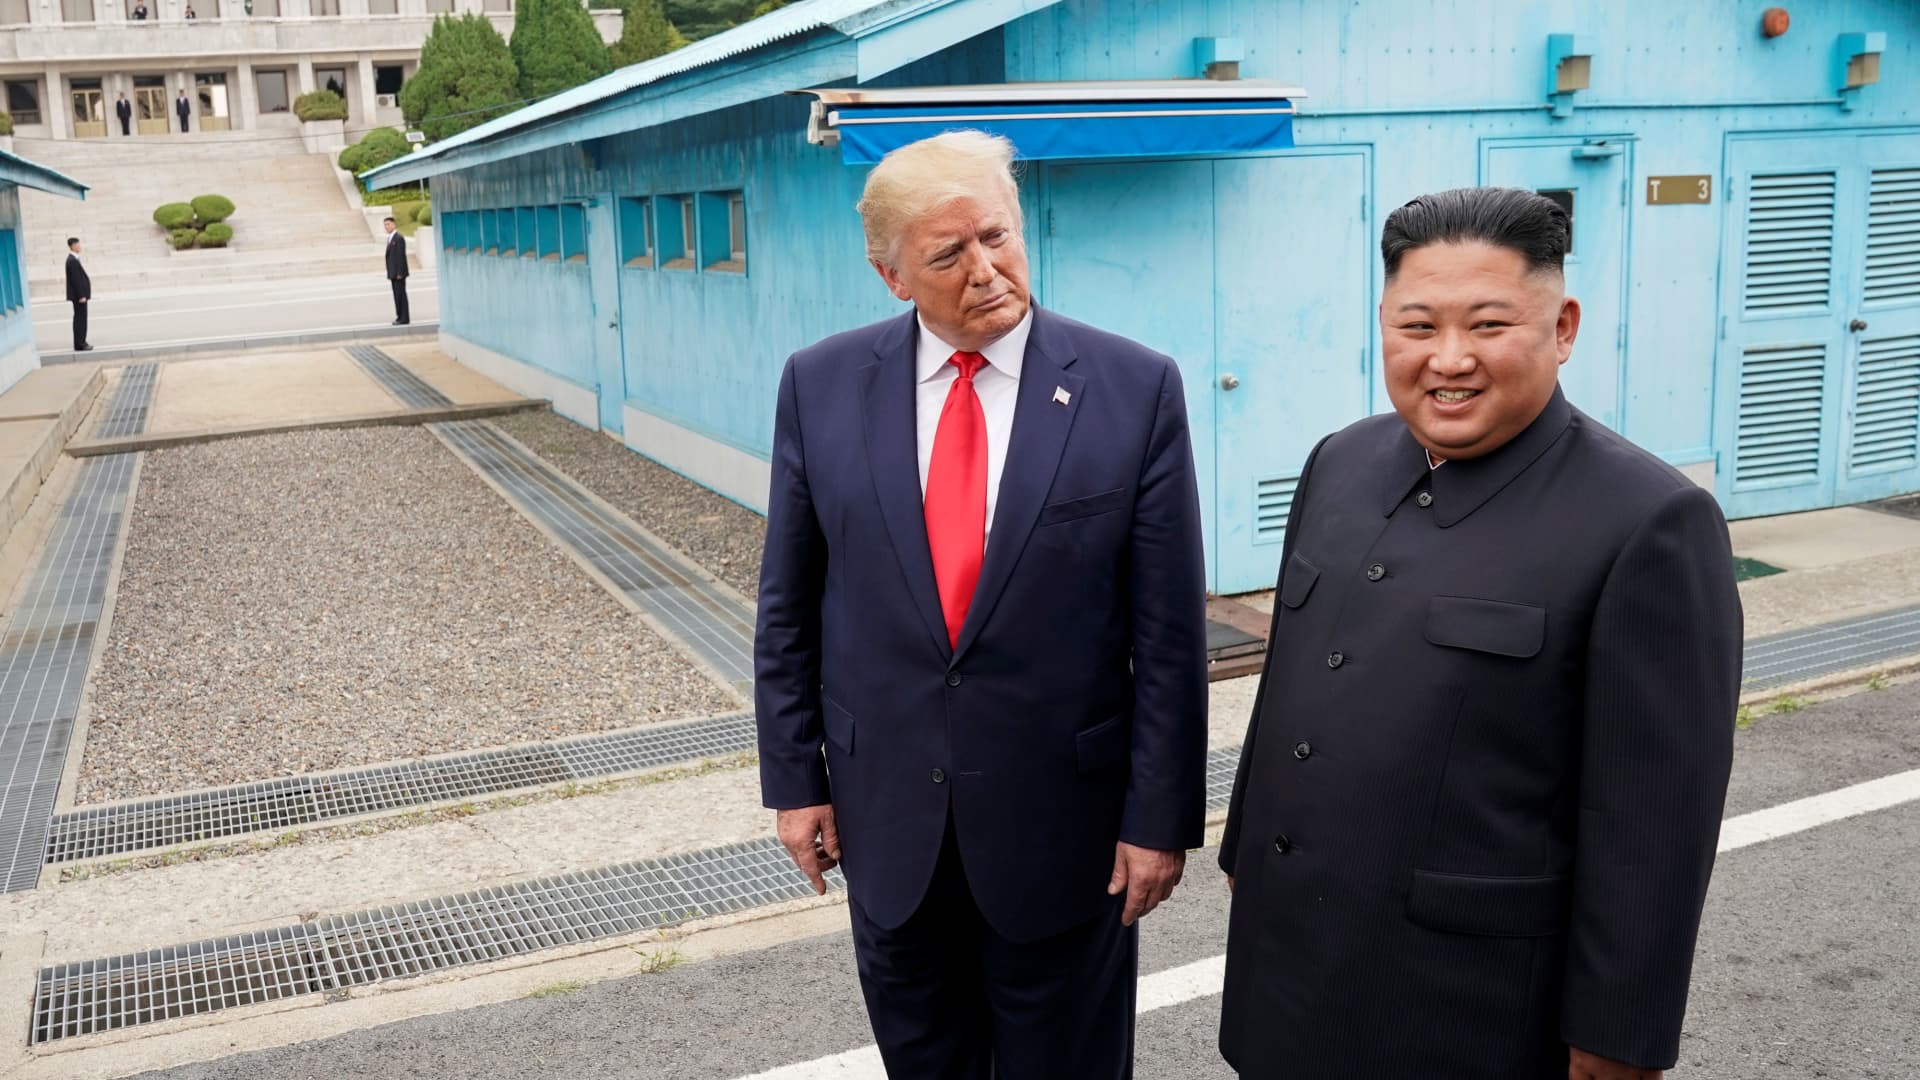 President Donald Trump meets with North Korean leader Kim Jong Un at the demilitarized zone separating the two Koreas, in Panmunjom, South Korea, June 30, 2019.